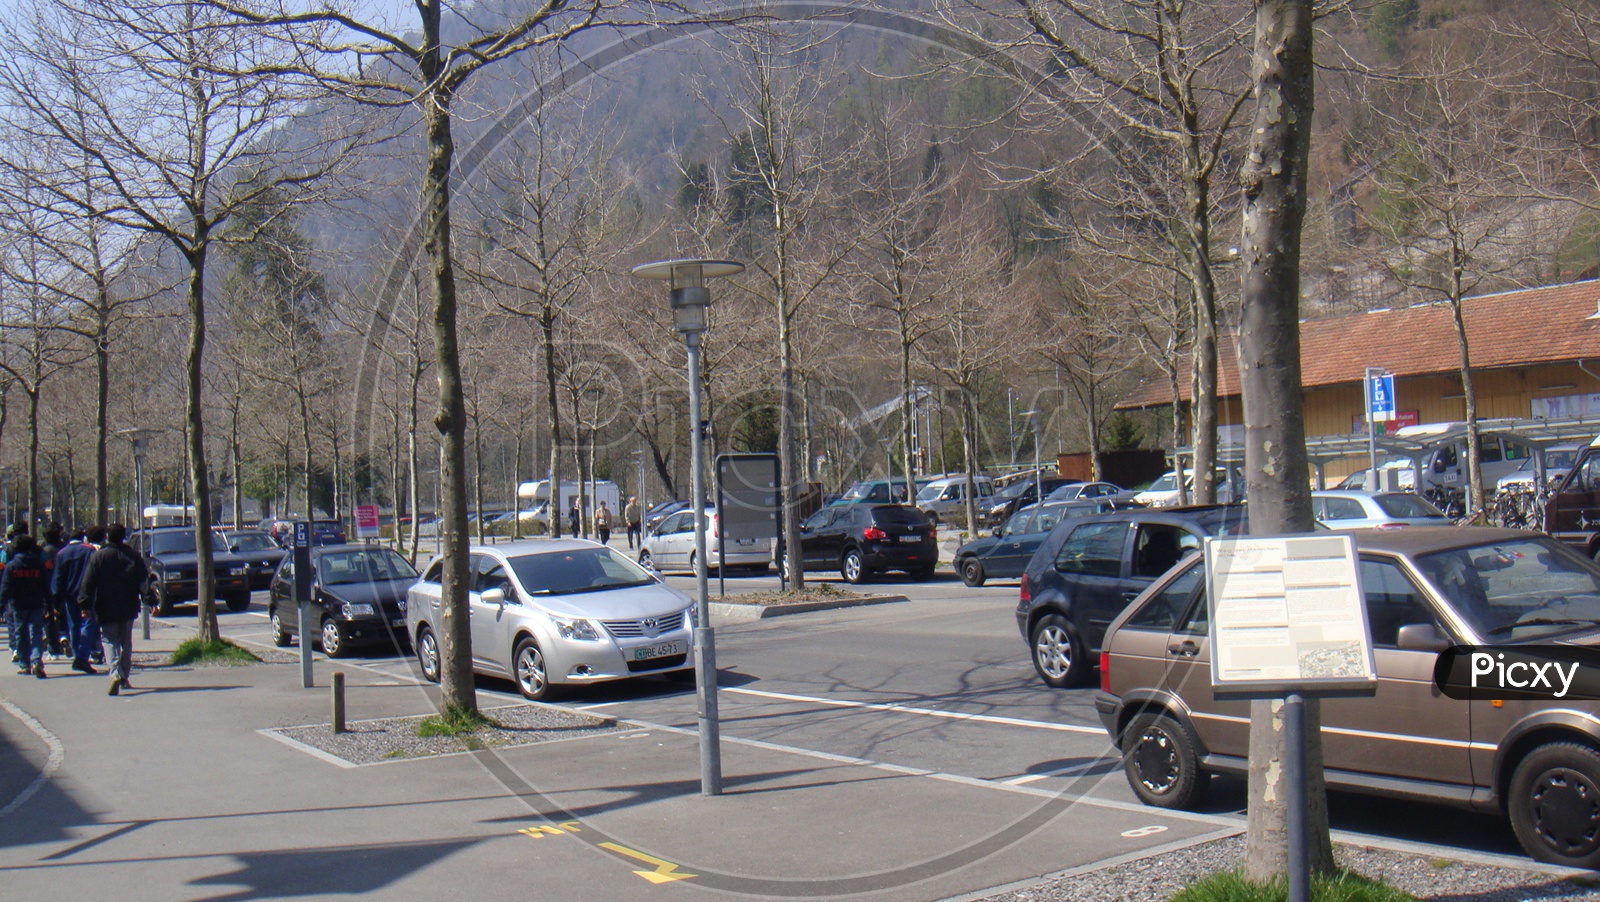 Cars parked along the road in Switzerland